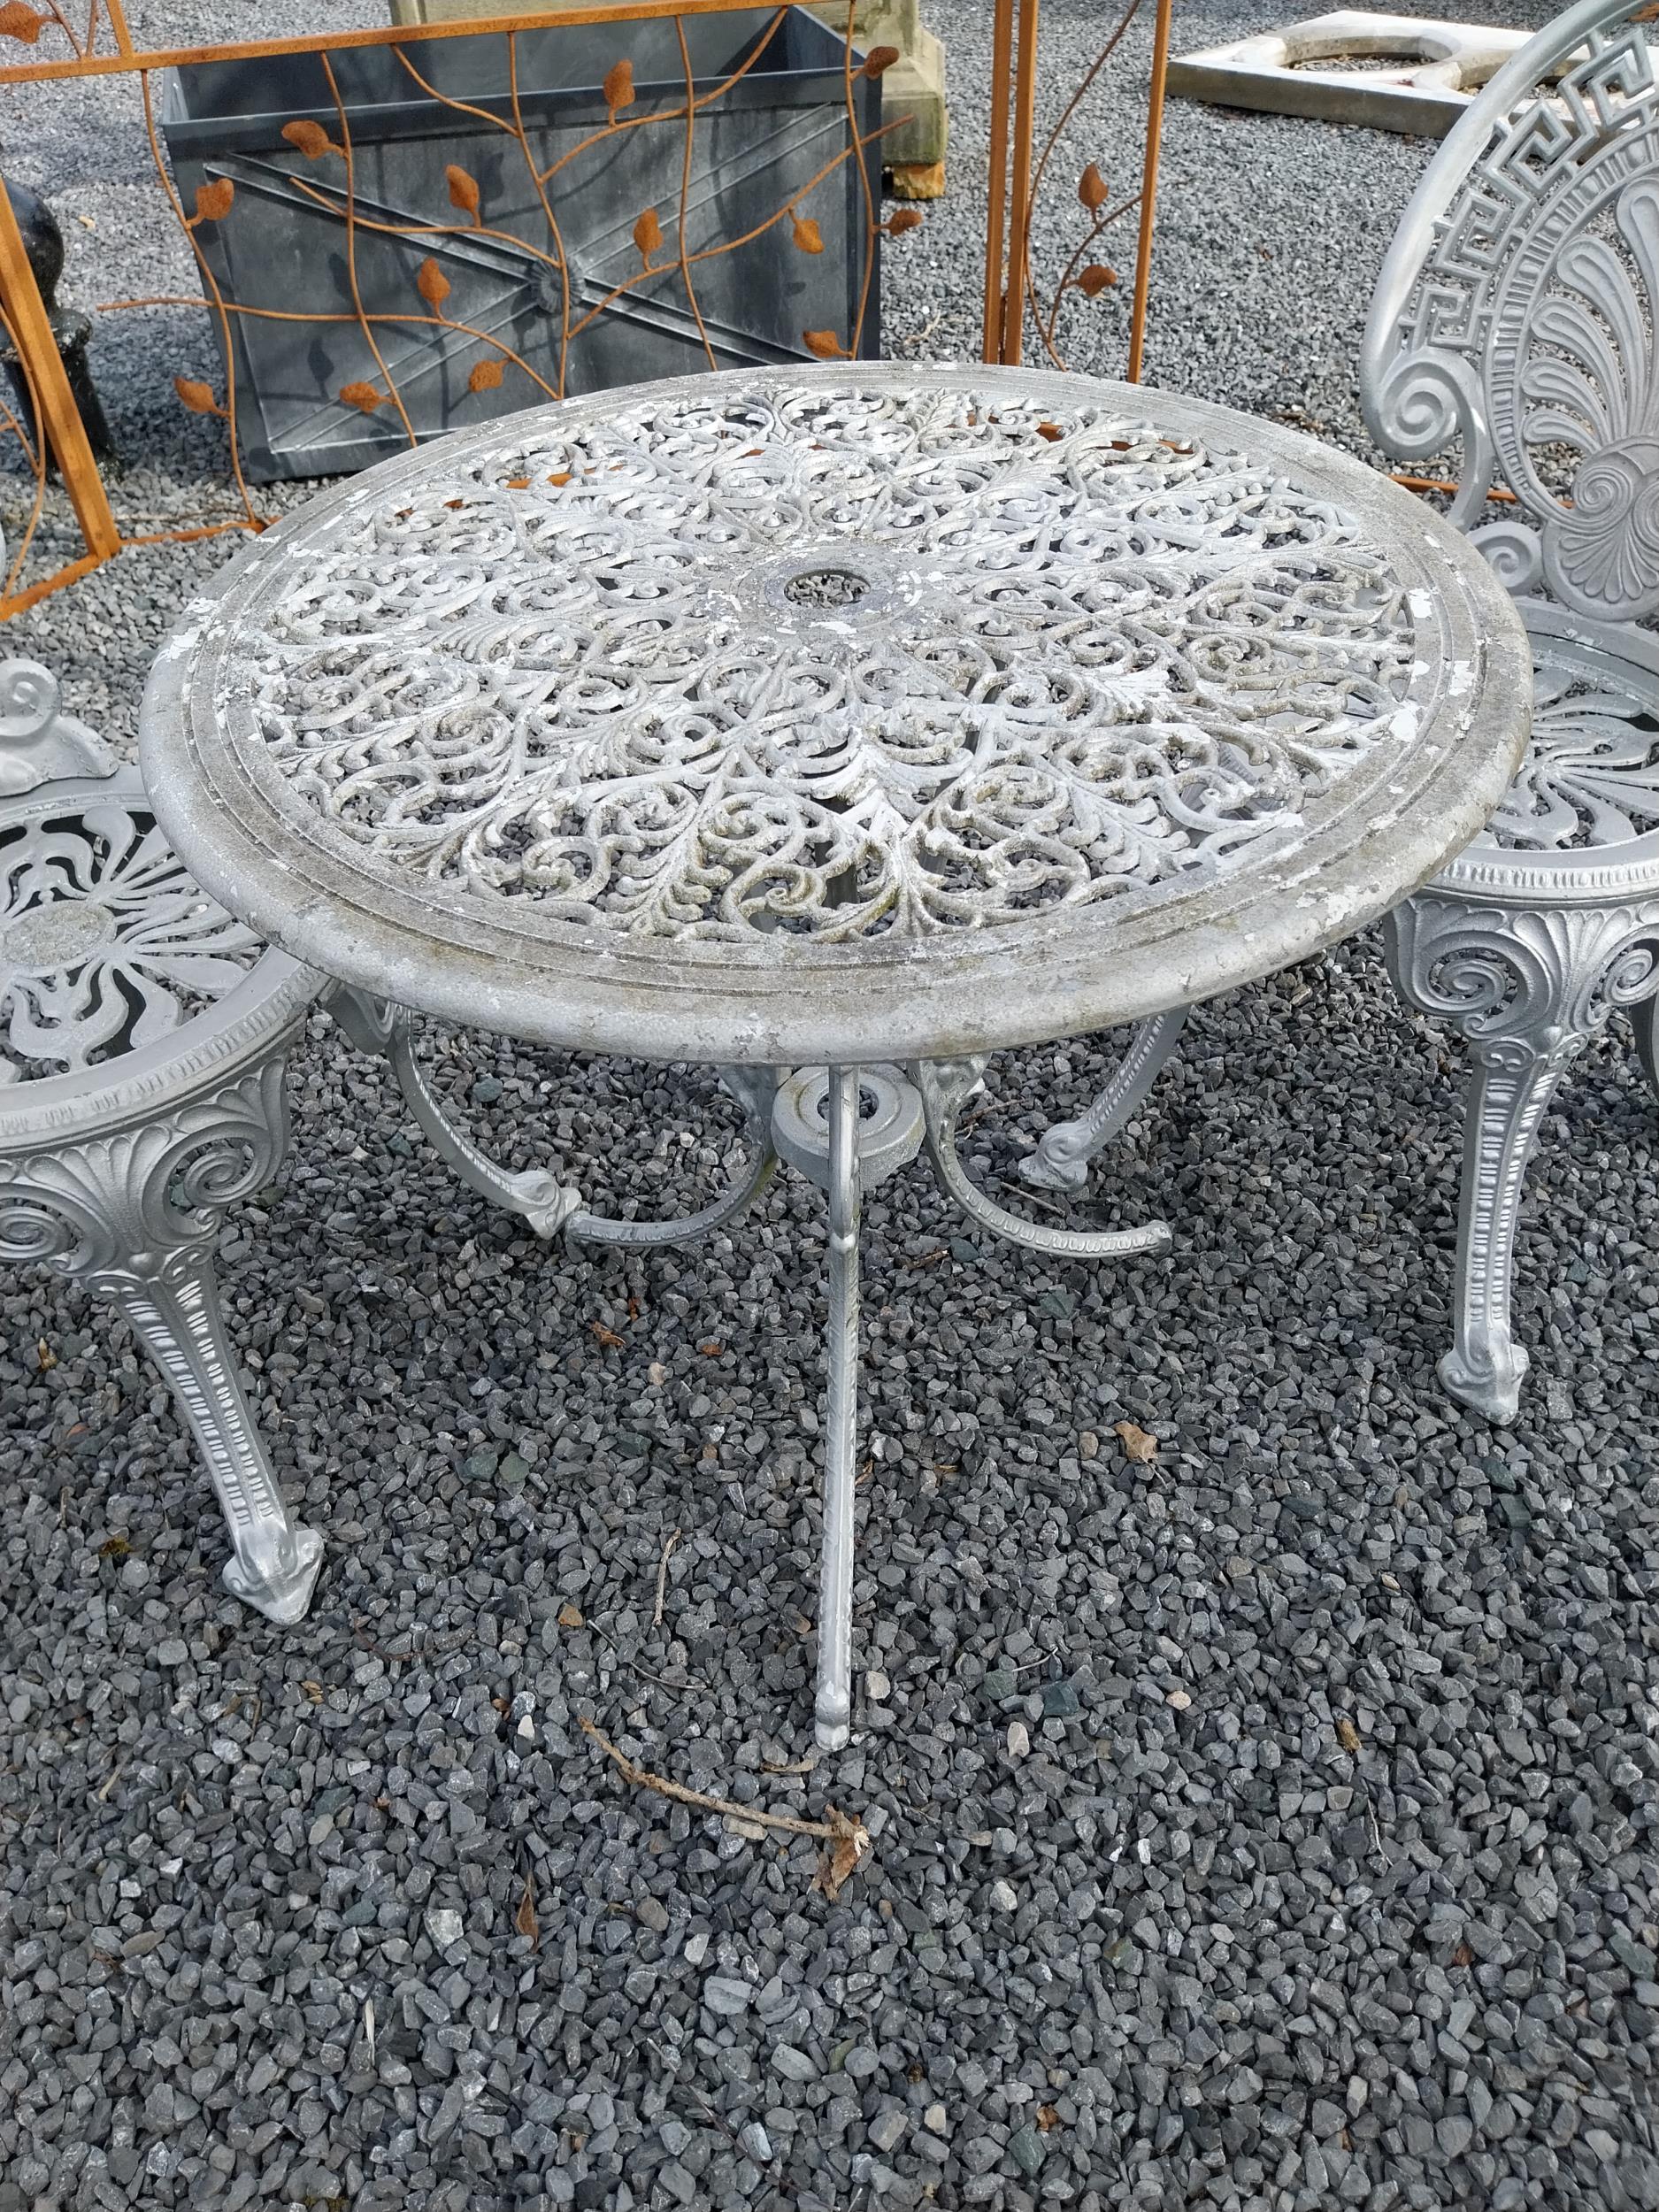 1950s cast aluminium garden table with two matching chairs {Tbl. 62 cm H x 68 cm Dia. and Chairs - Image 3 of 4